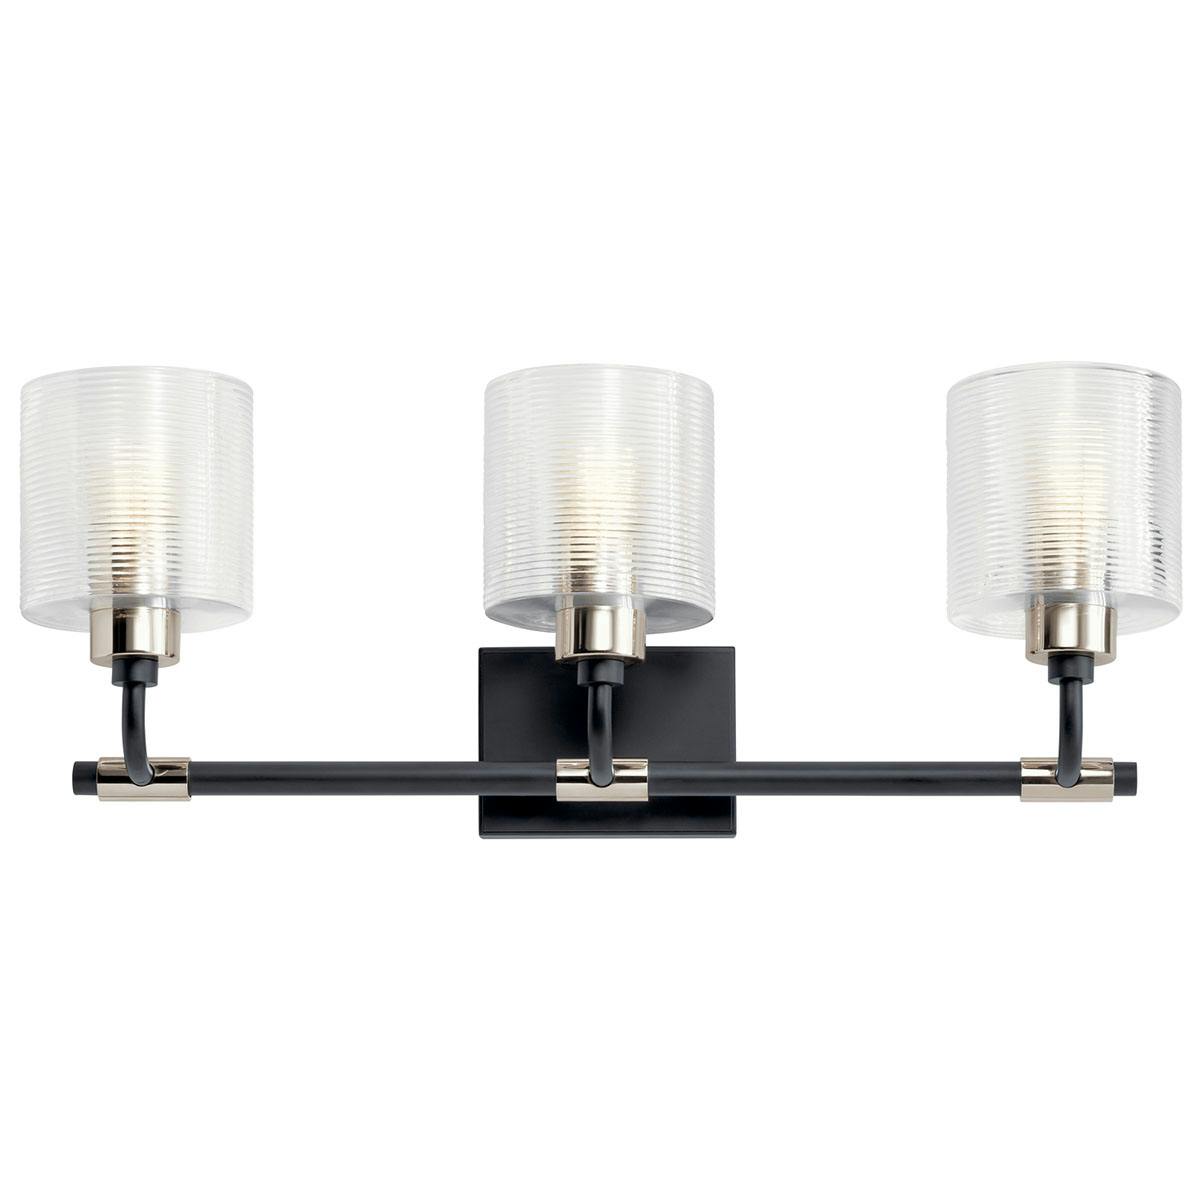 Front view of the Harvan 25" 3 Light Vanity Light Black on a white background